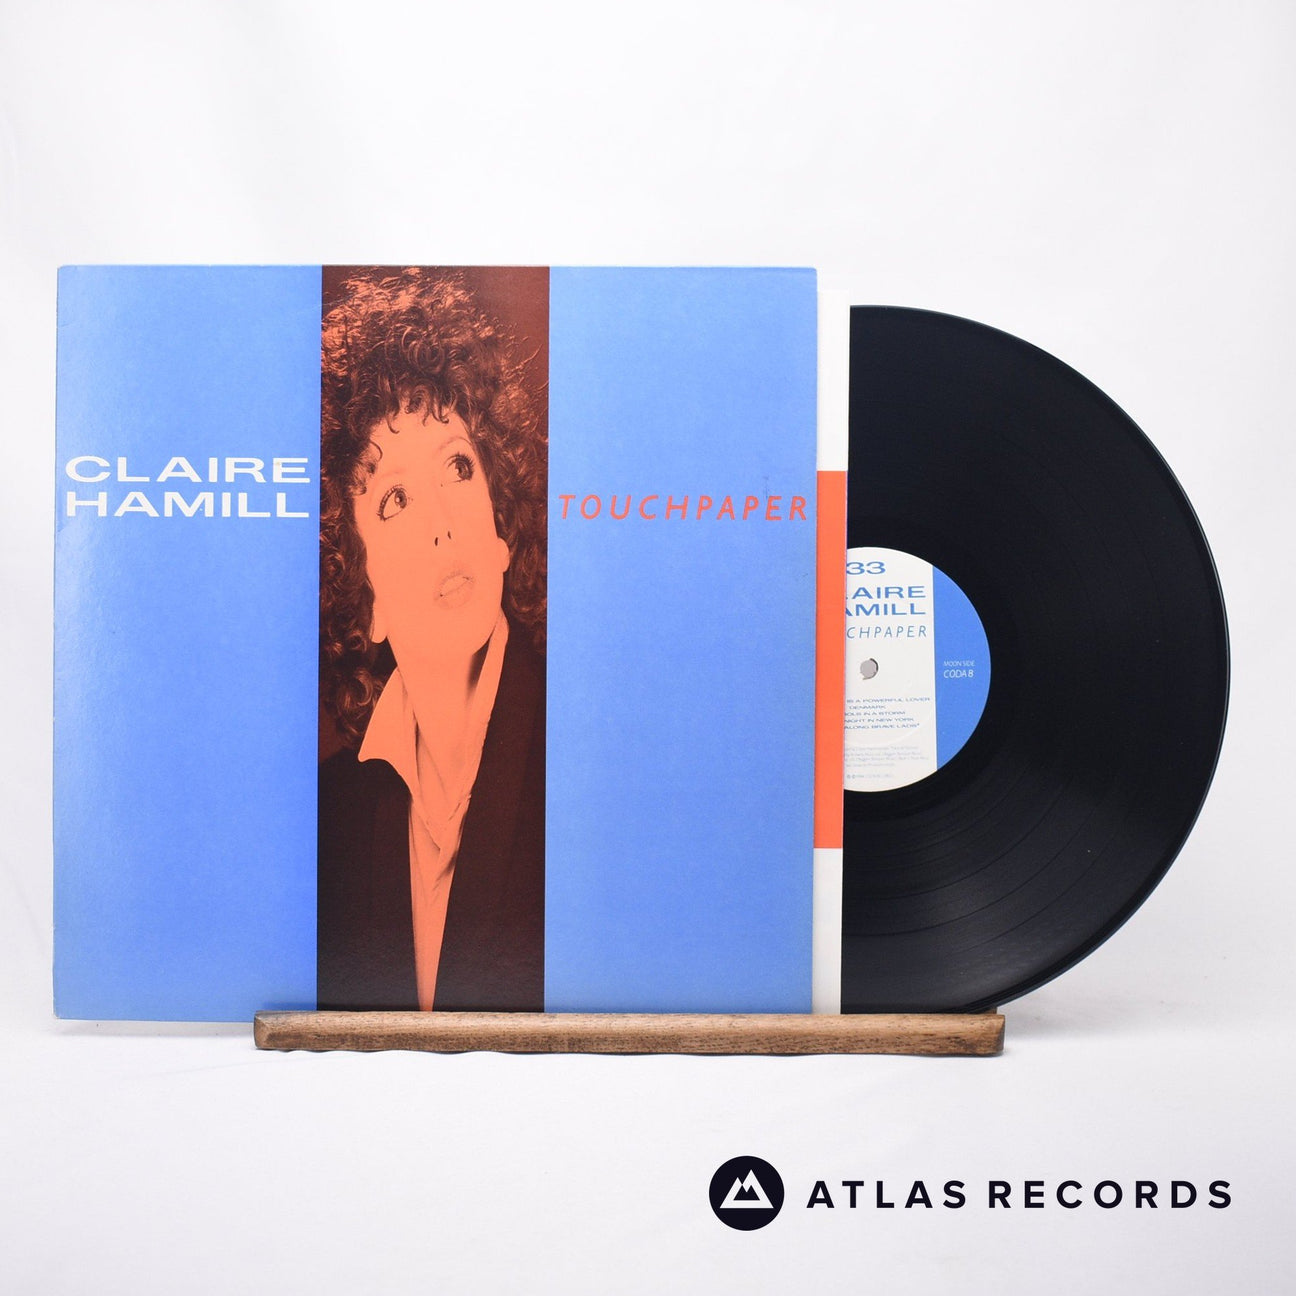 Claire Hamill Touchpaper LP Vinyl Record - Front Cover & Record